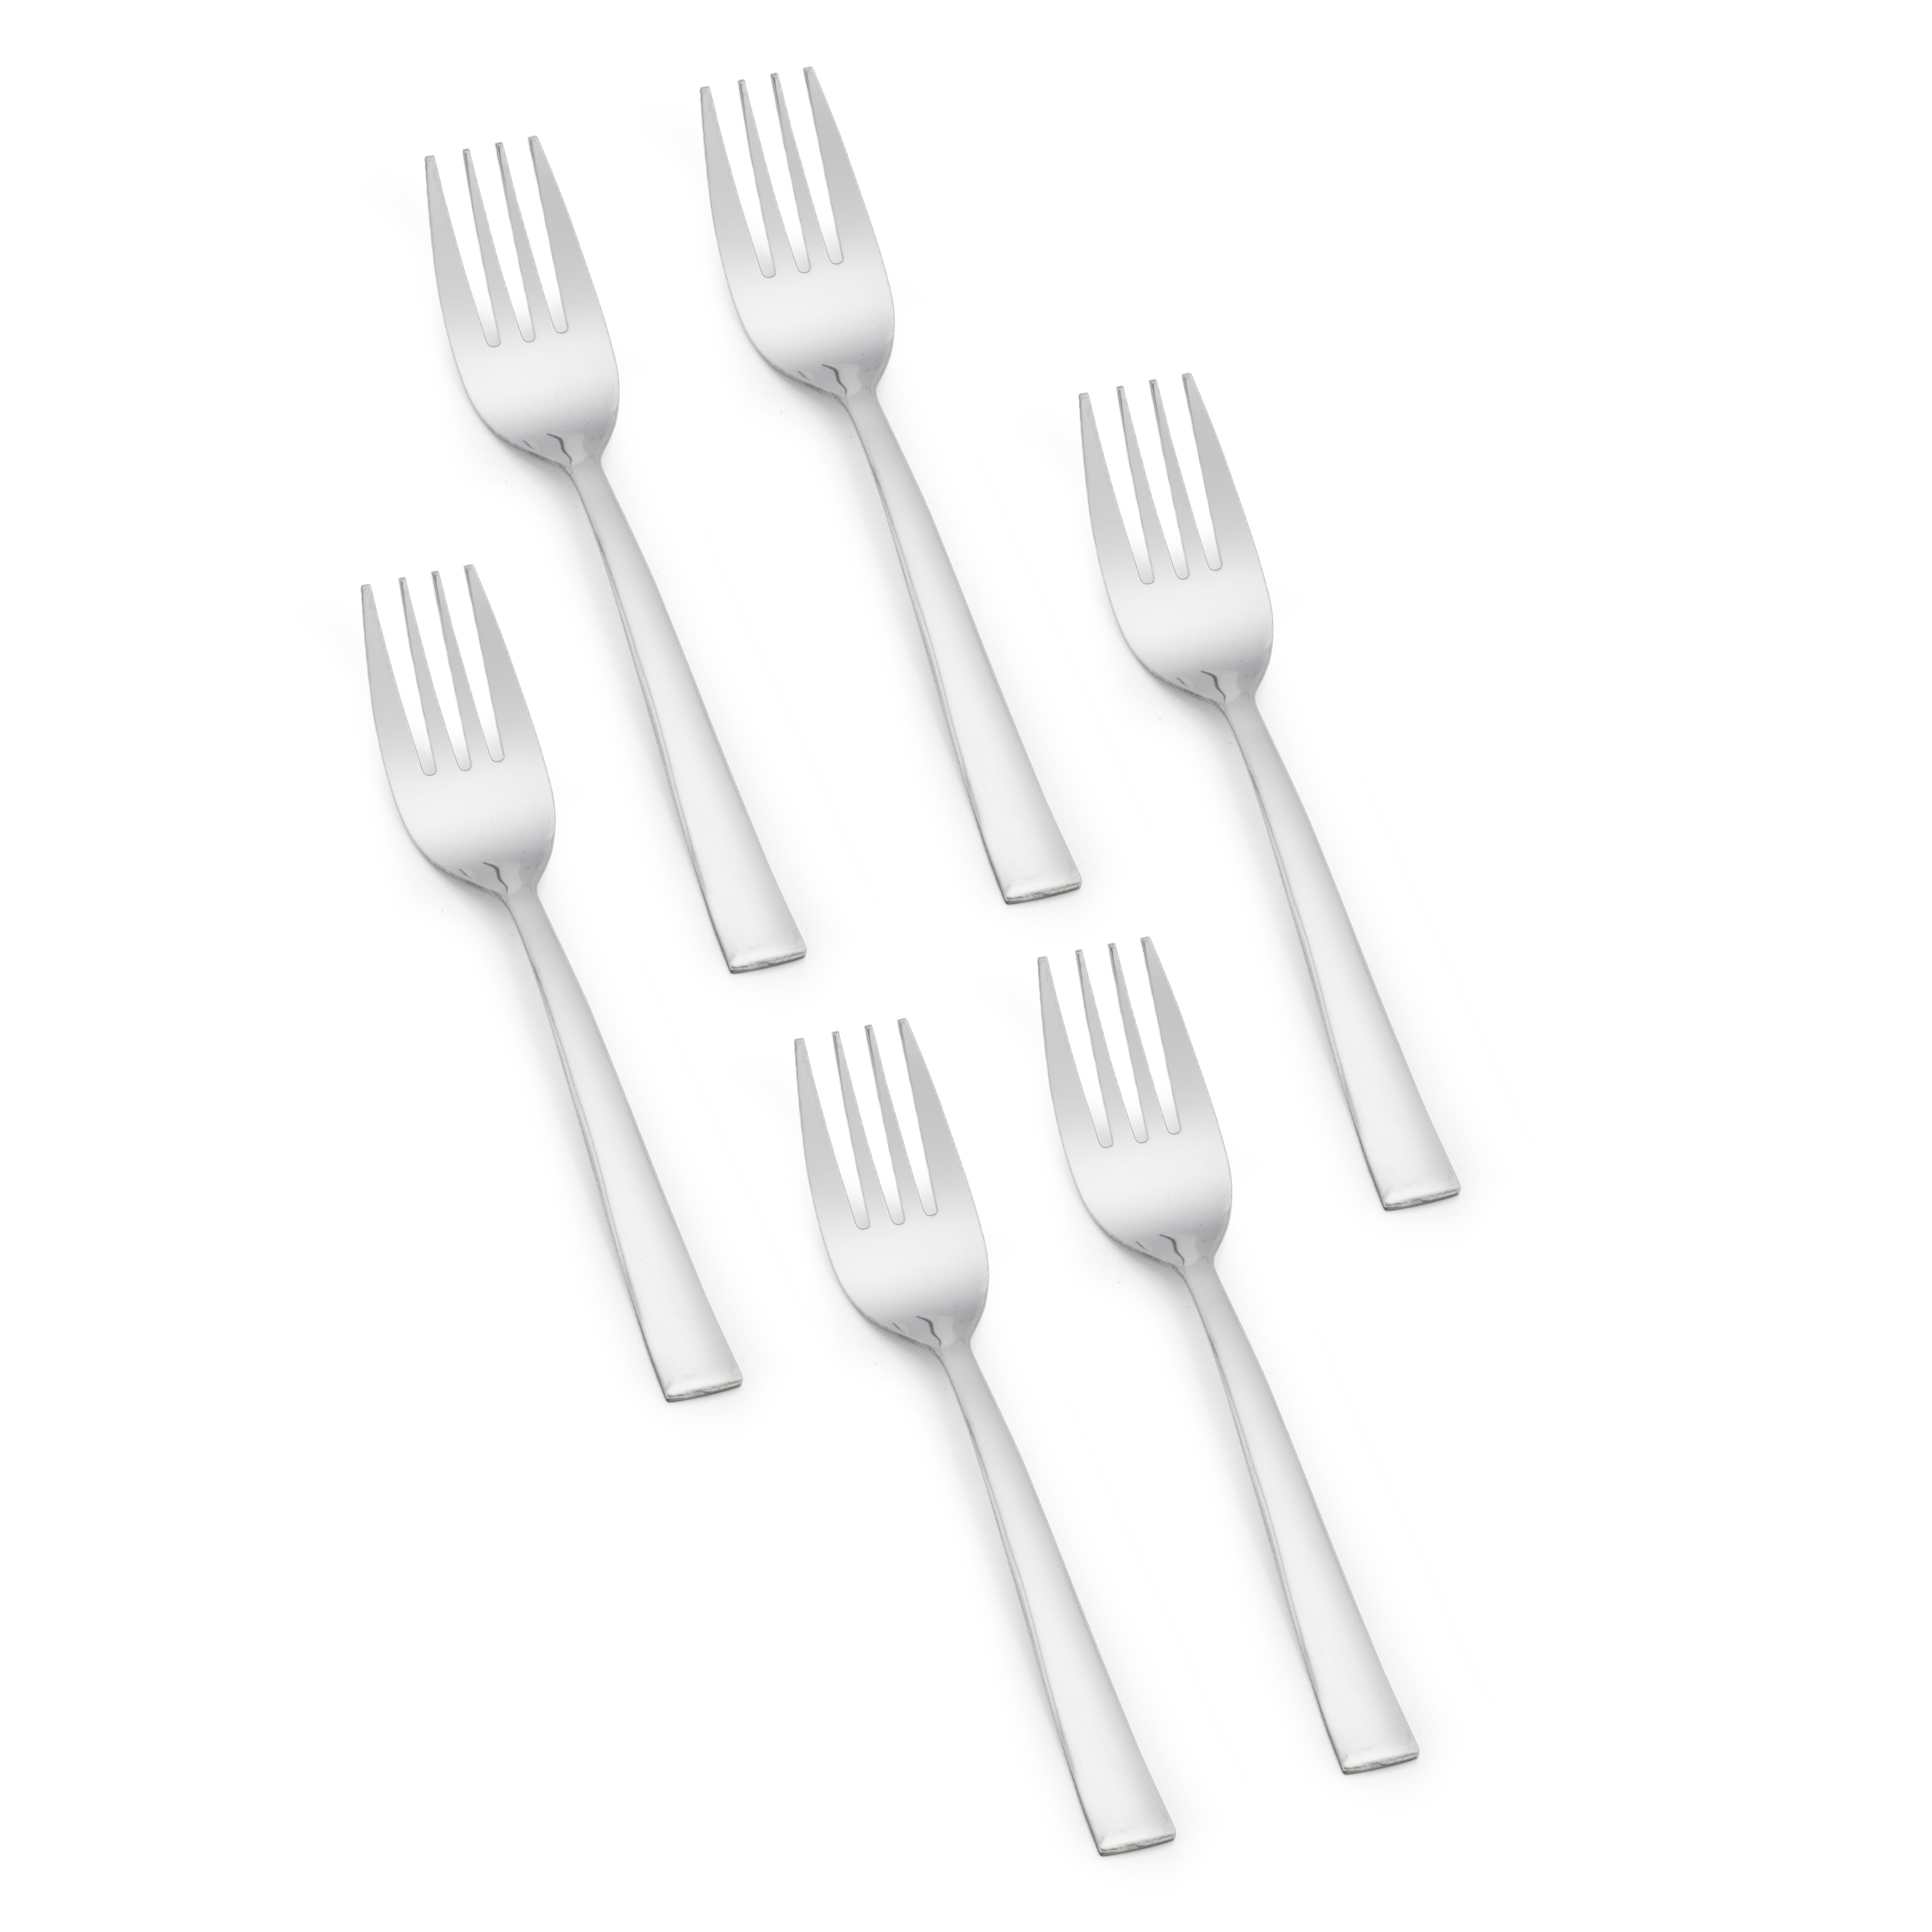 Arias by Lara Dutta Fiesta Cutlery Set of 24 With Stand (Silver)